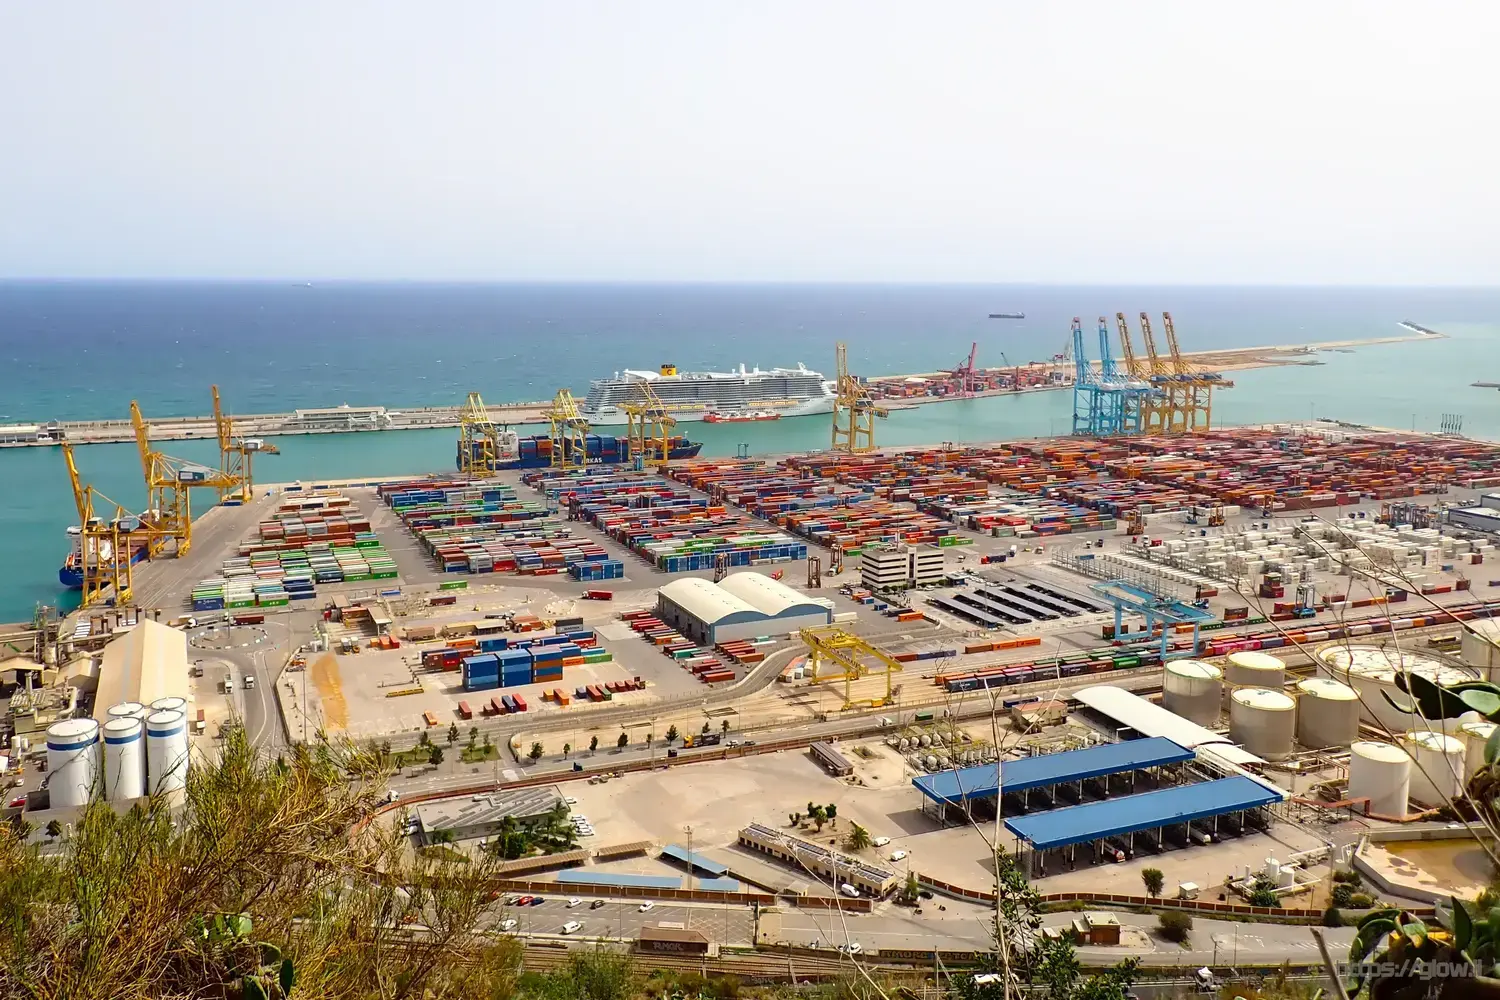 Picture of the Port of Barcelona with lots of containers and a large cruise ship